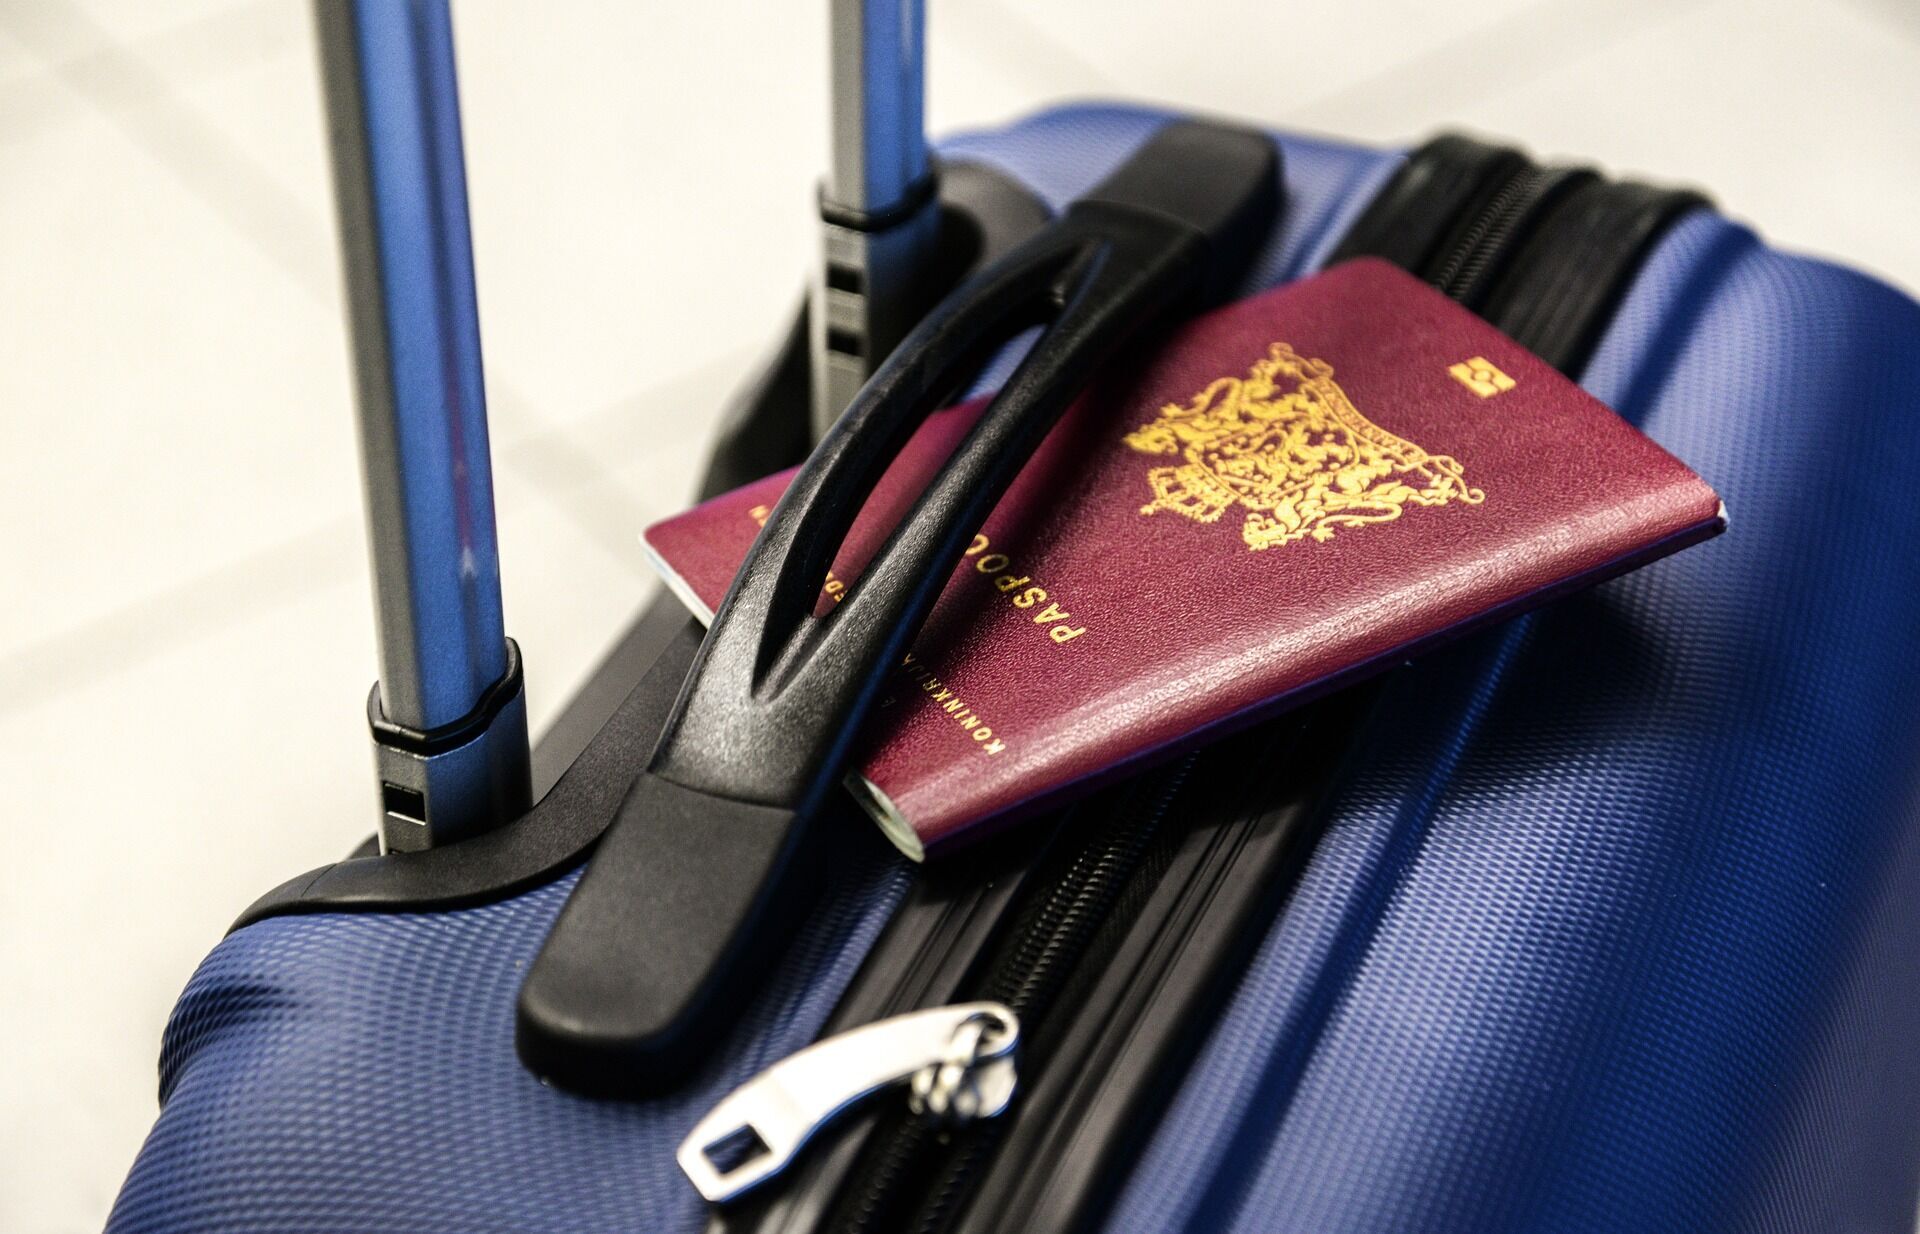 Why you should check your passport before traveling and what to look for